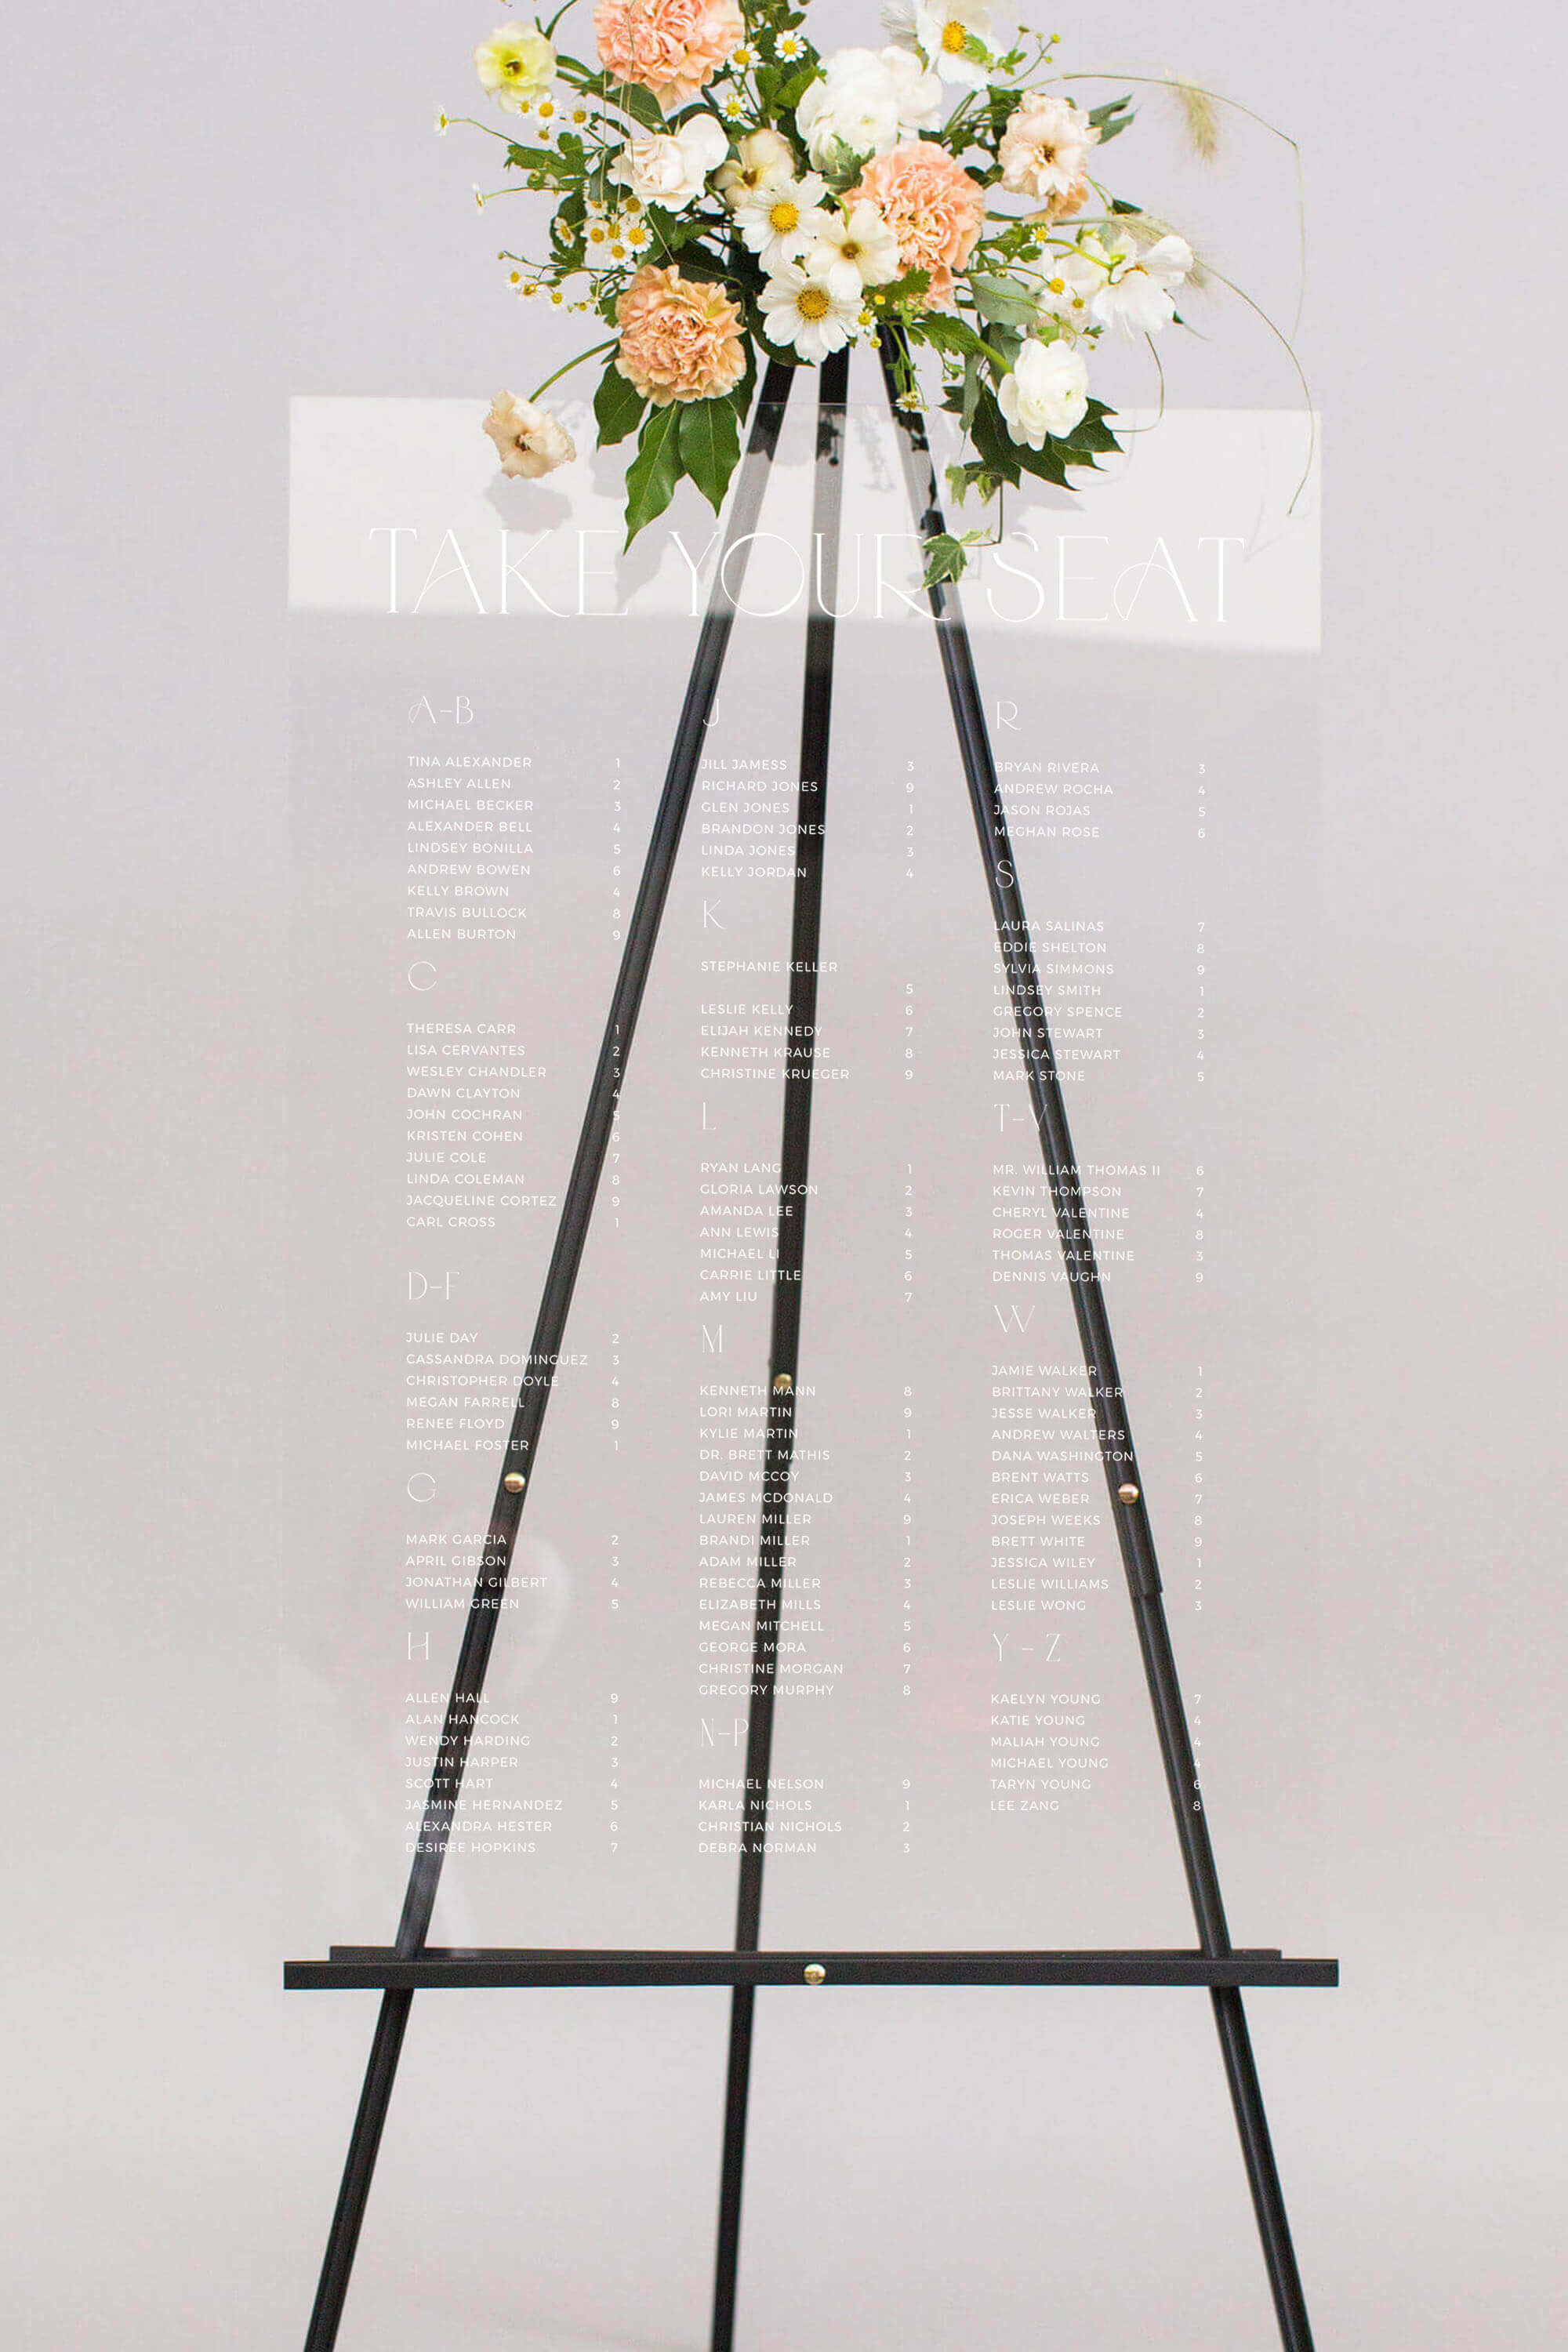 Acrylic Seating Chart Clear Acrylic Lily Roe Co.